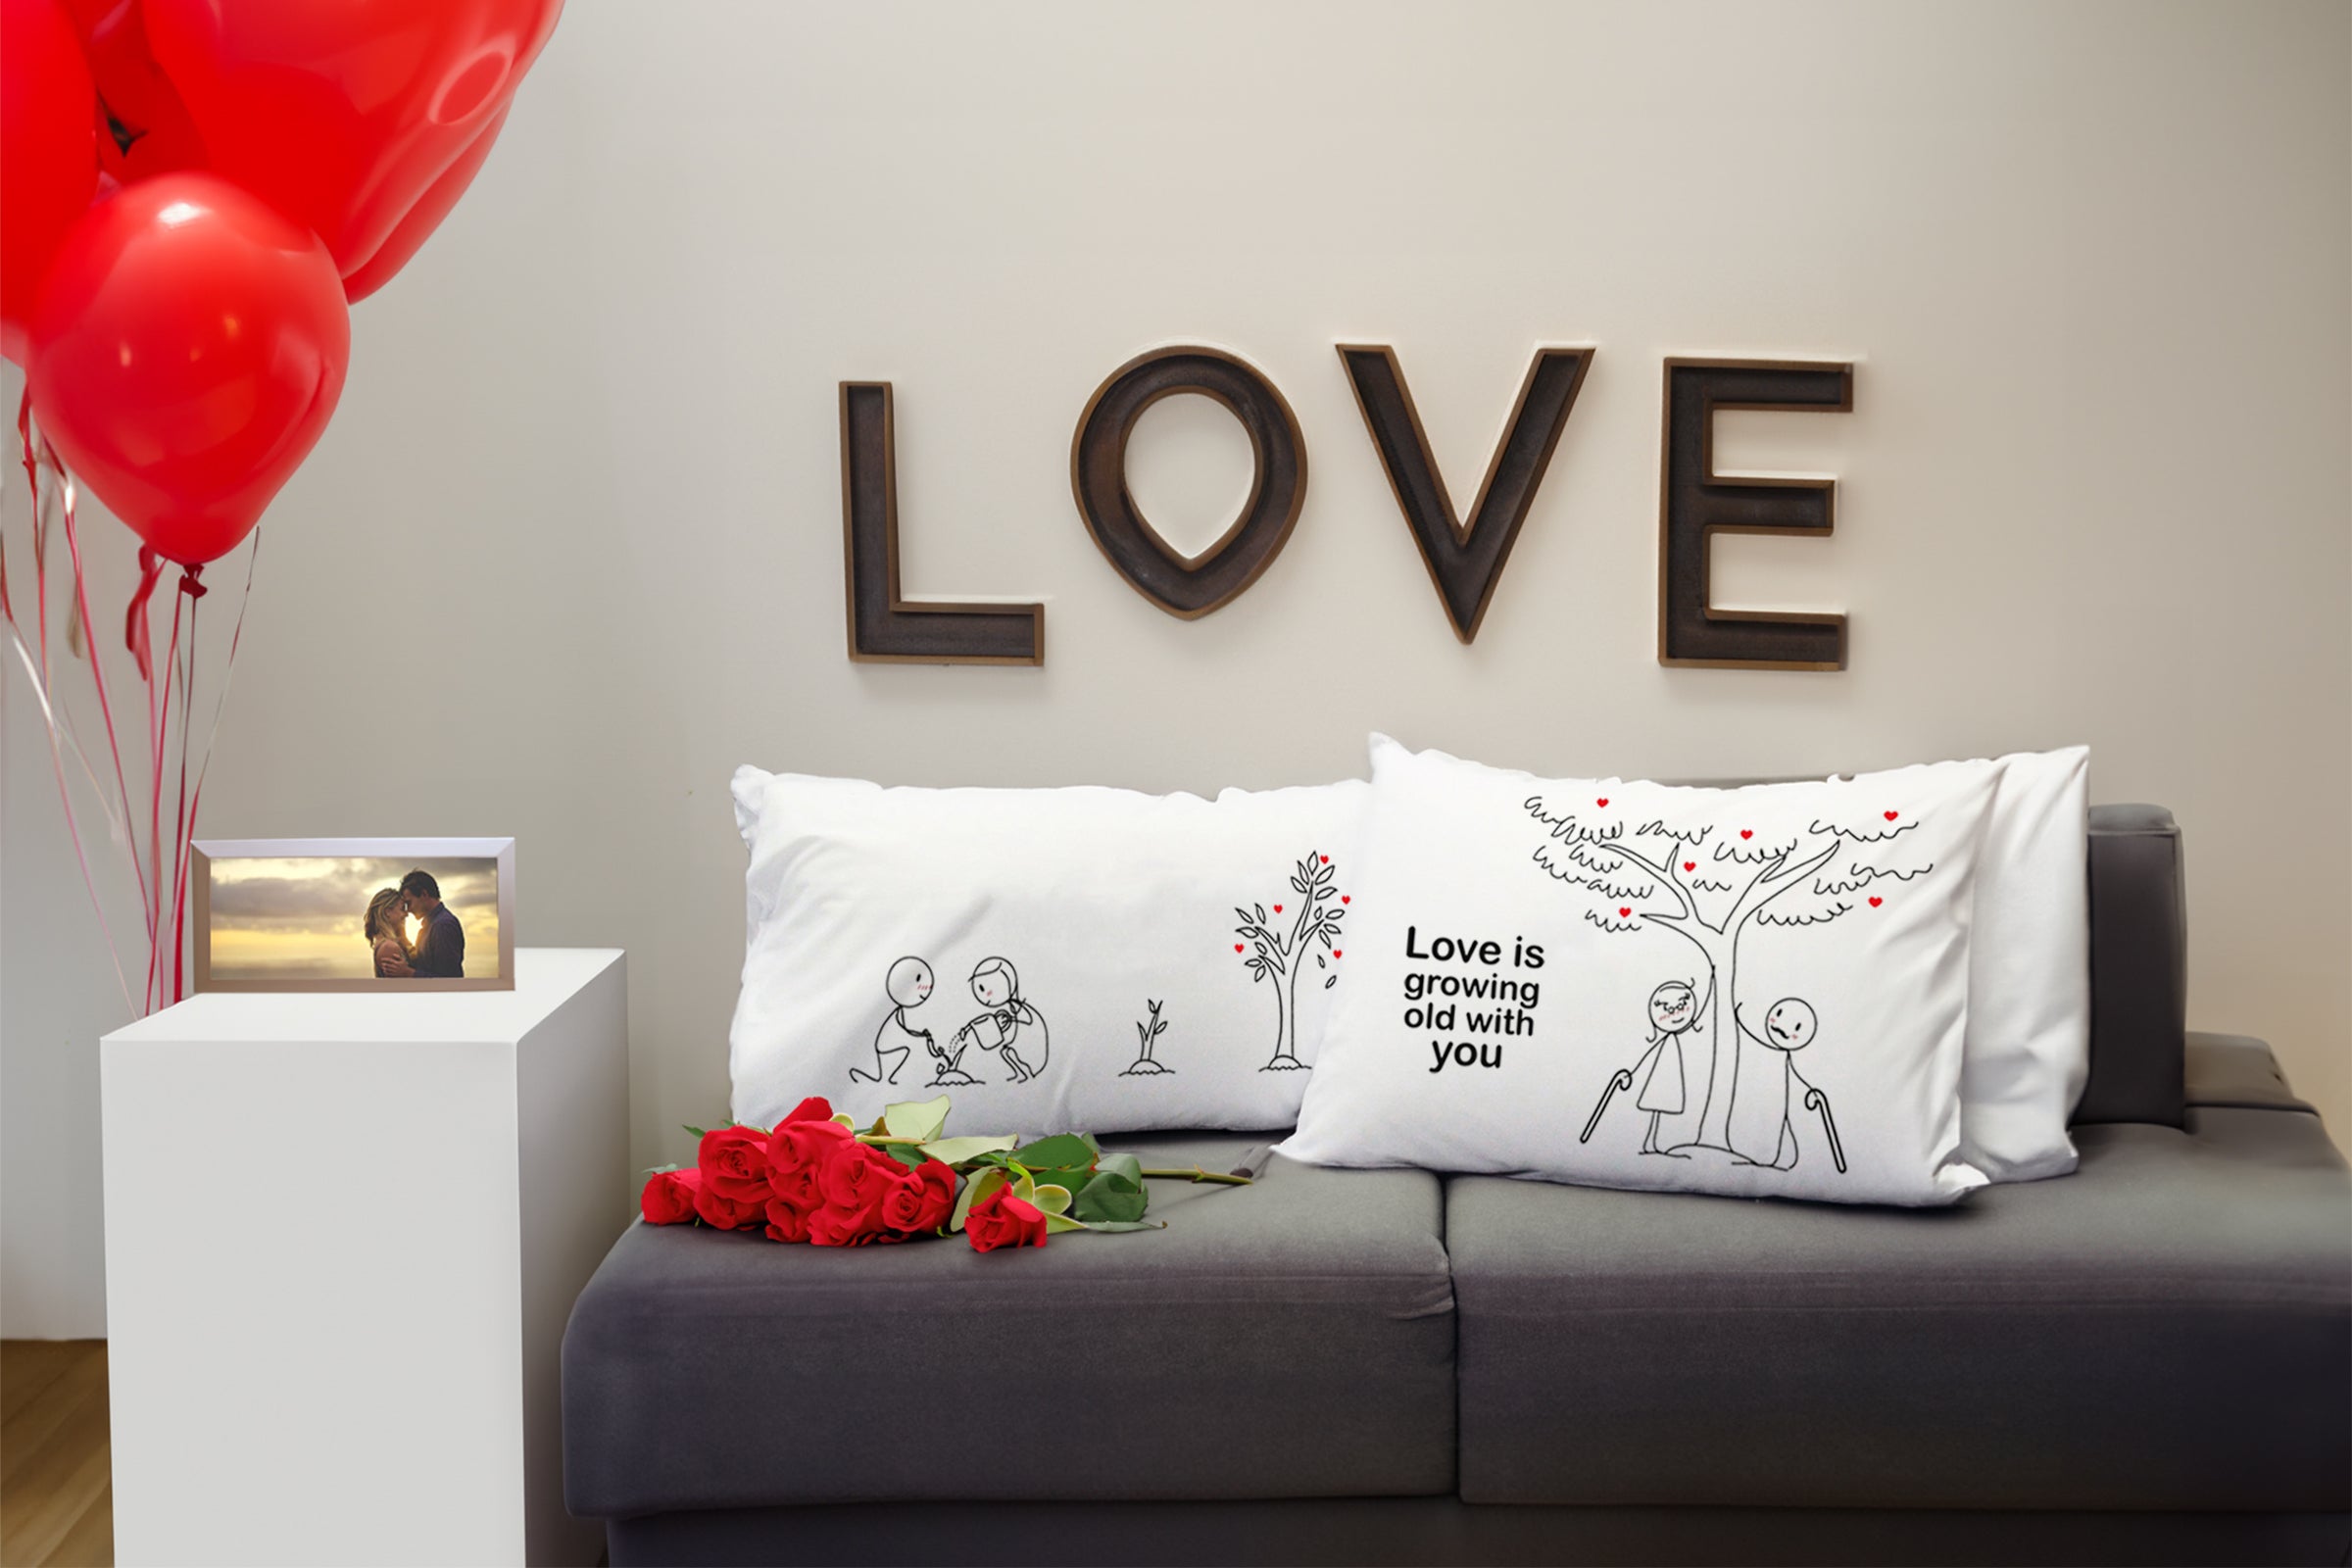 Explore BoldLoft's anniversary gifts for couples featured love-themed stick figure and love sayings designs